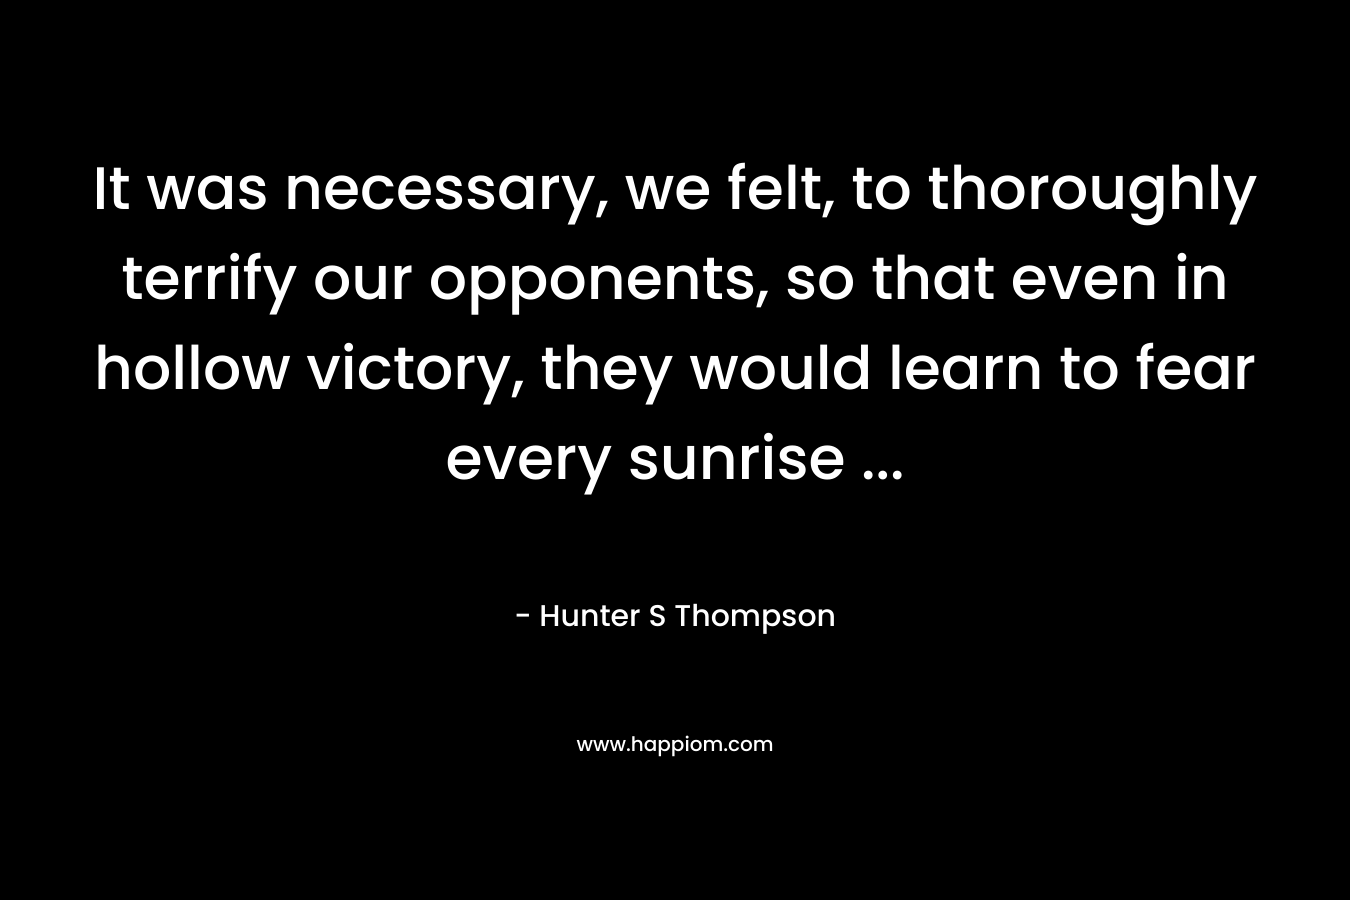 It was necessary, we felt, to thoroughly terrify our opponents, so that even in hollow victory, they would learn to fear every sunrise … – Hunter S Thompson